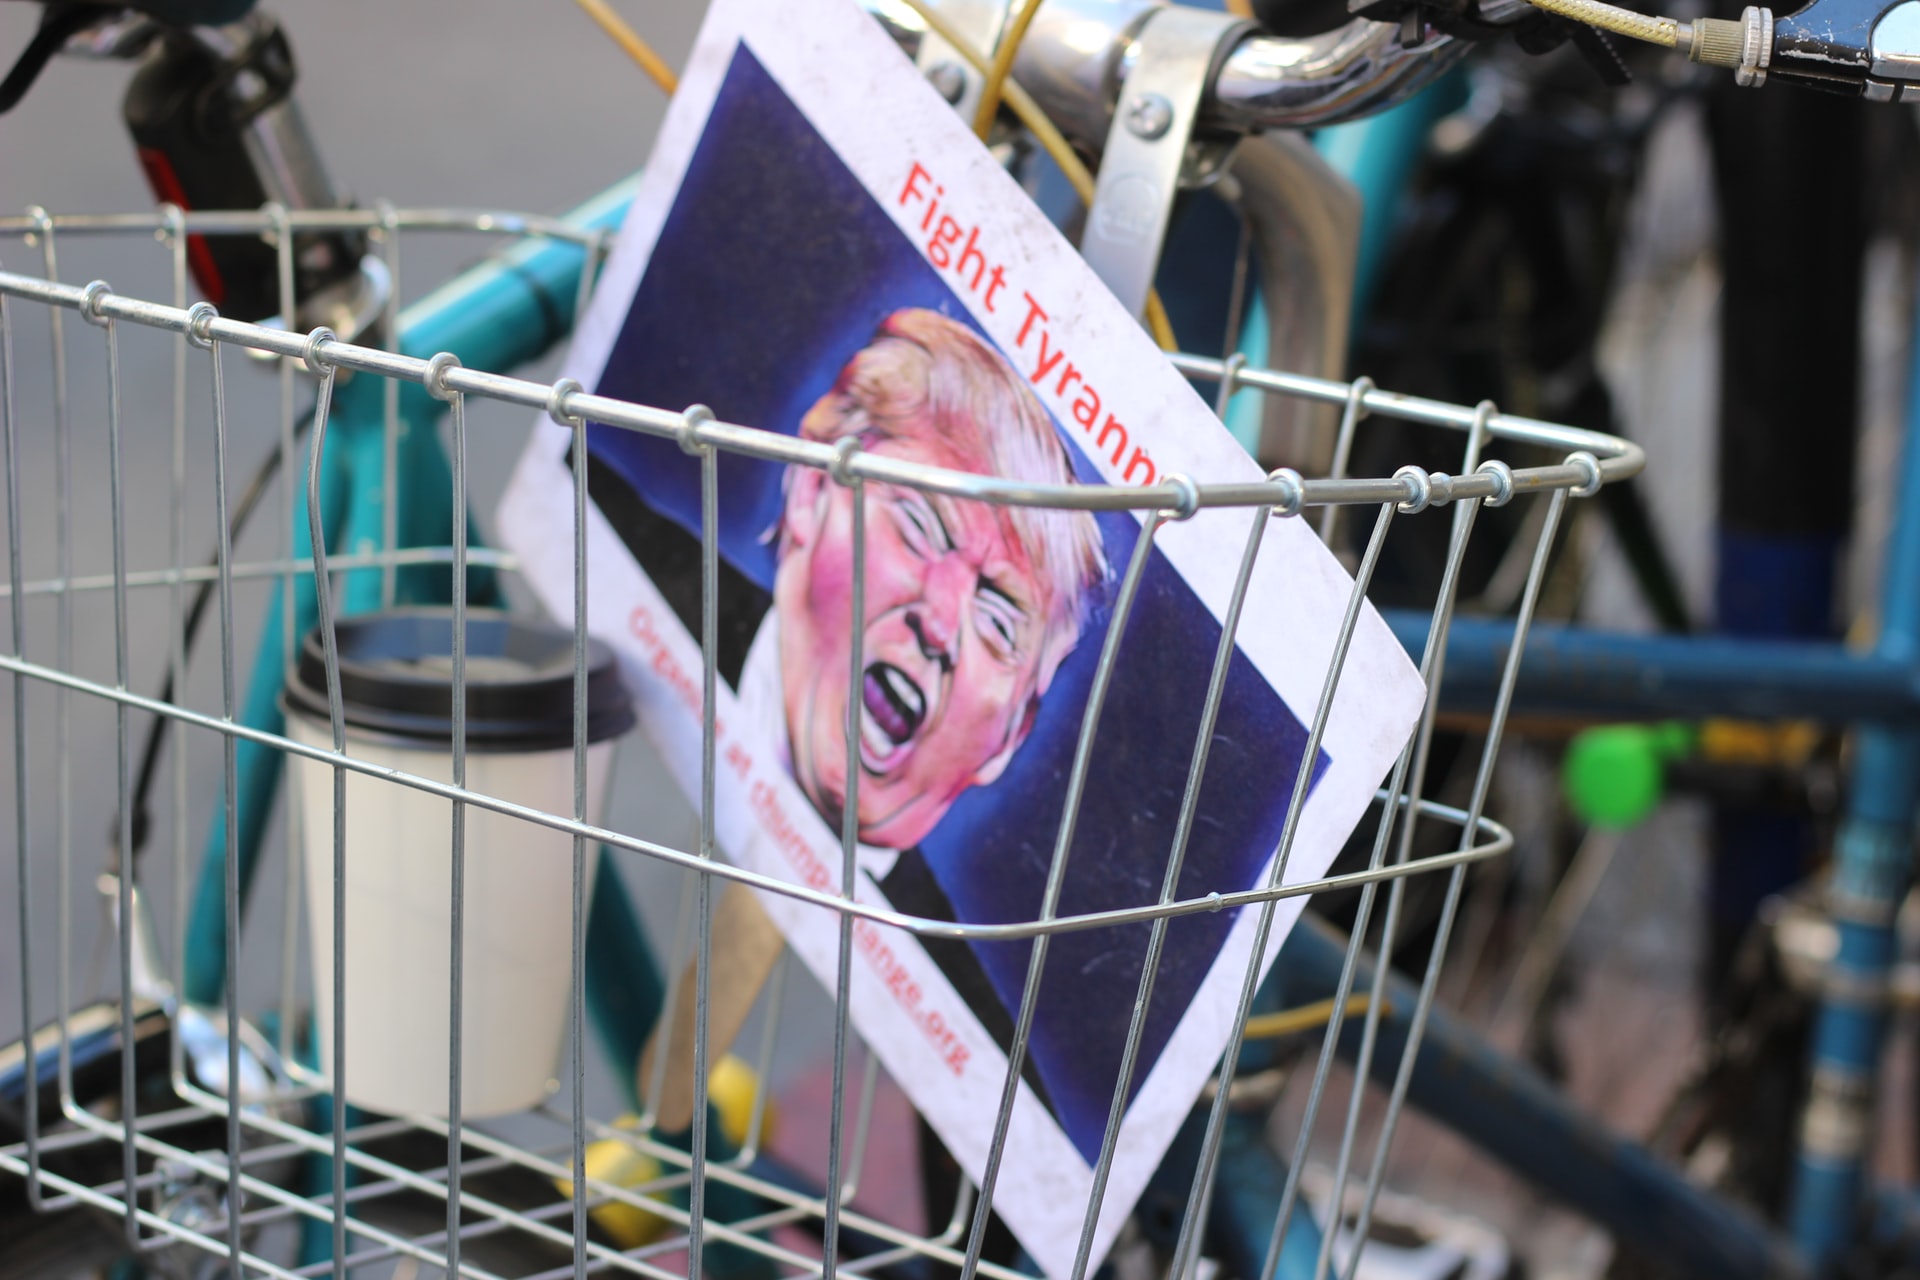 A poster of Trump in a grocery cart.